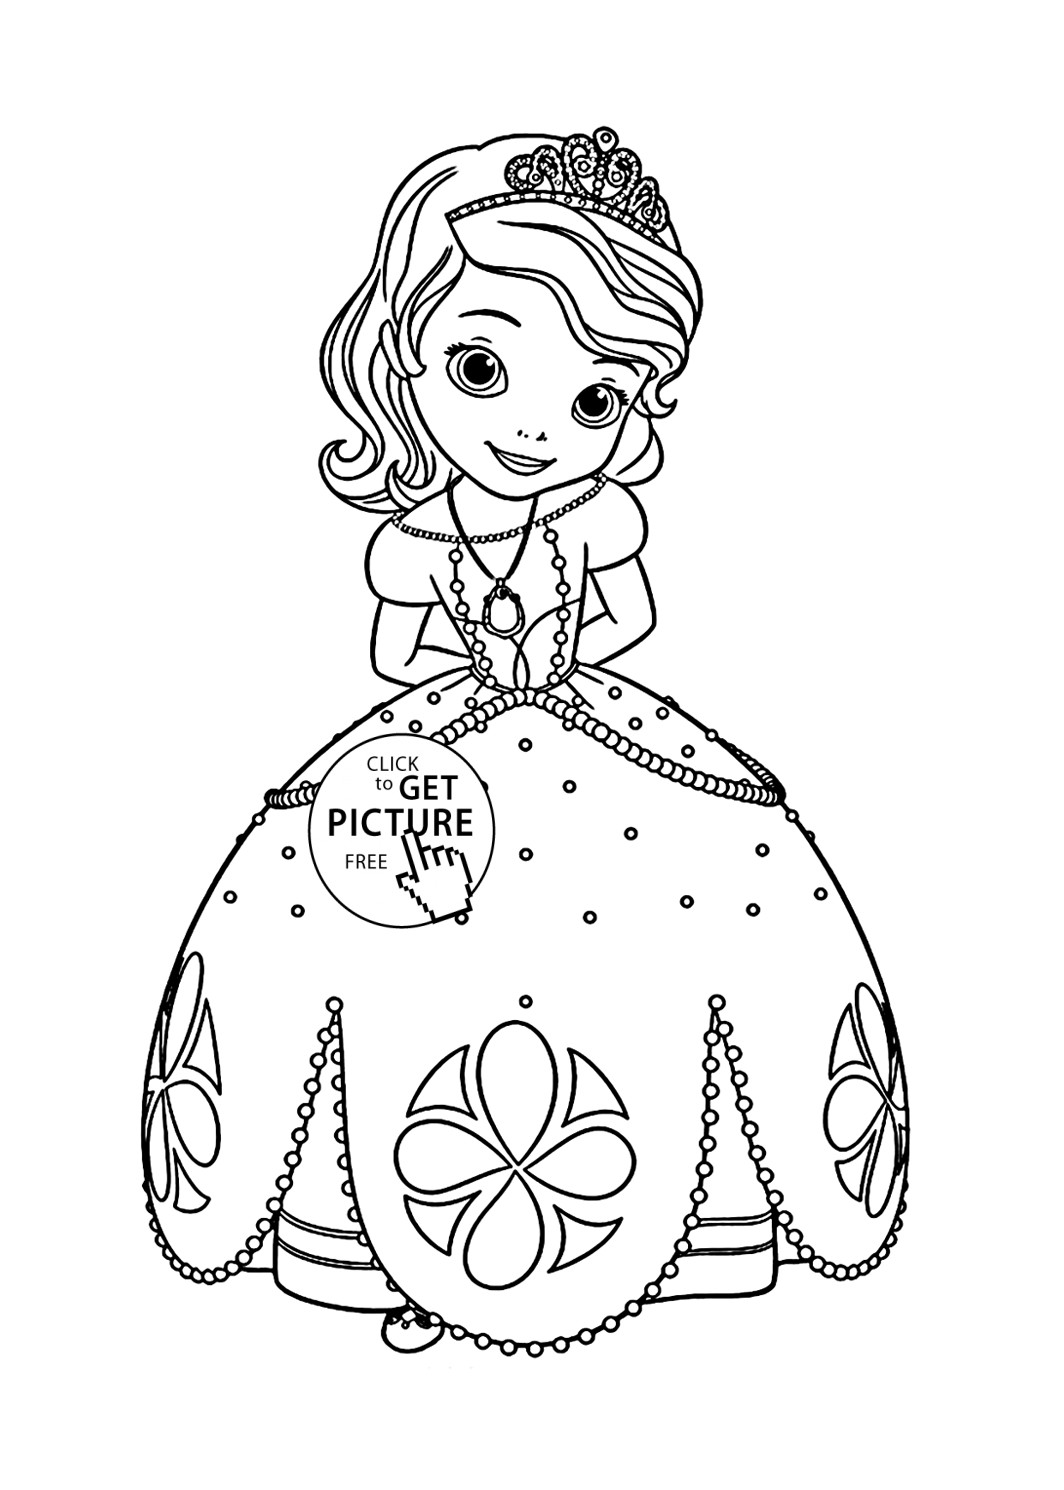 Coloring Pages For Girls Princess
 Princess Sofia coloring page for girls disney for kids